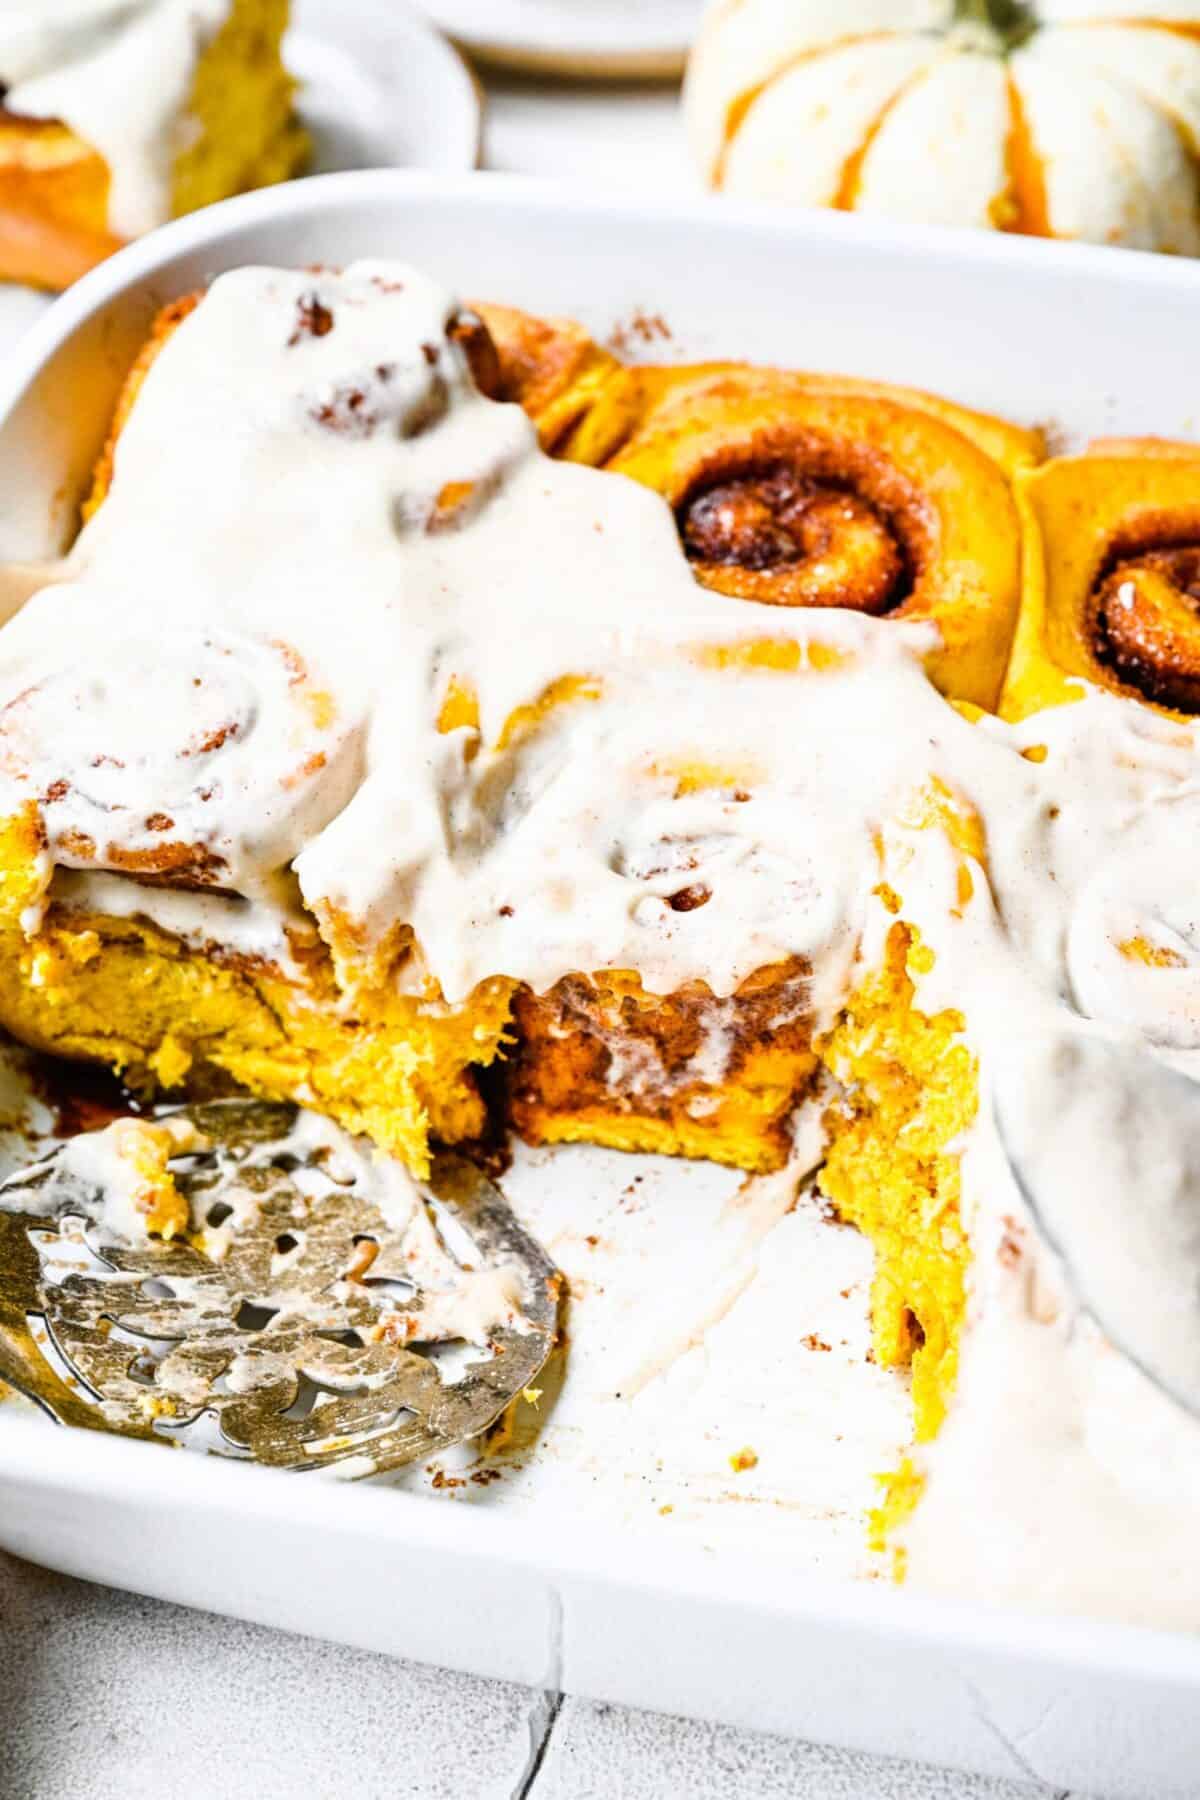 Close up of a some cinnamon rolls in a baking tray, covered in frosting, with a serving spoon